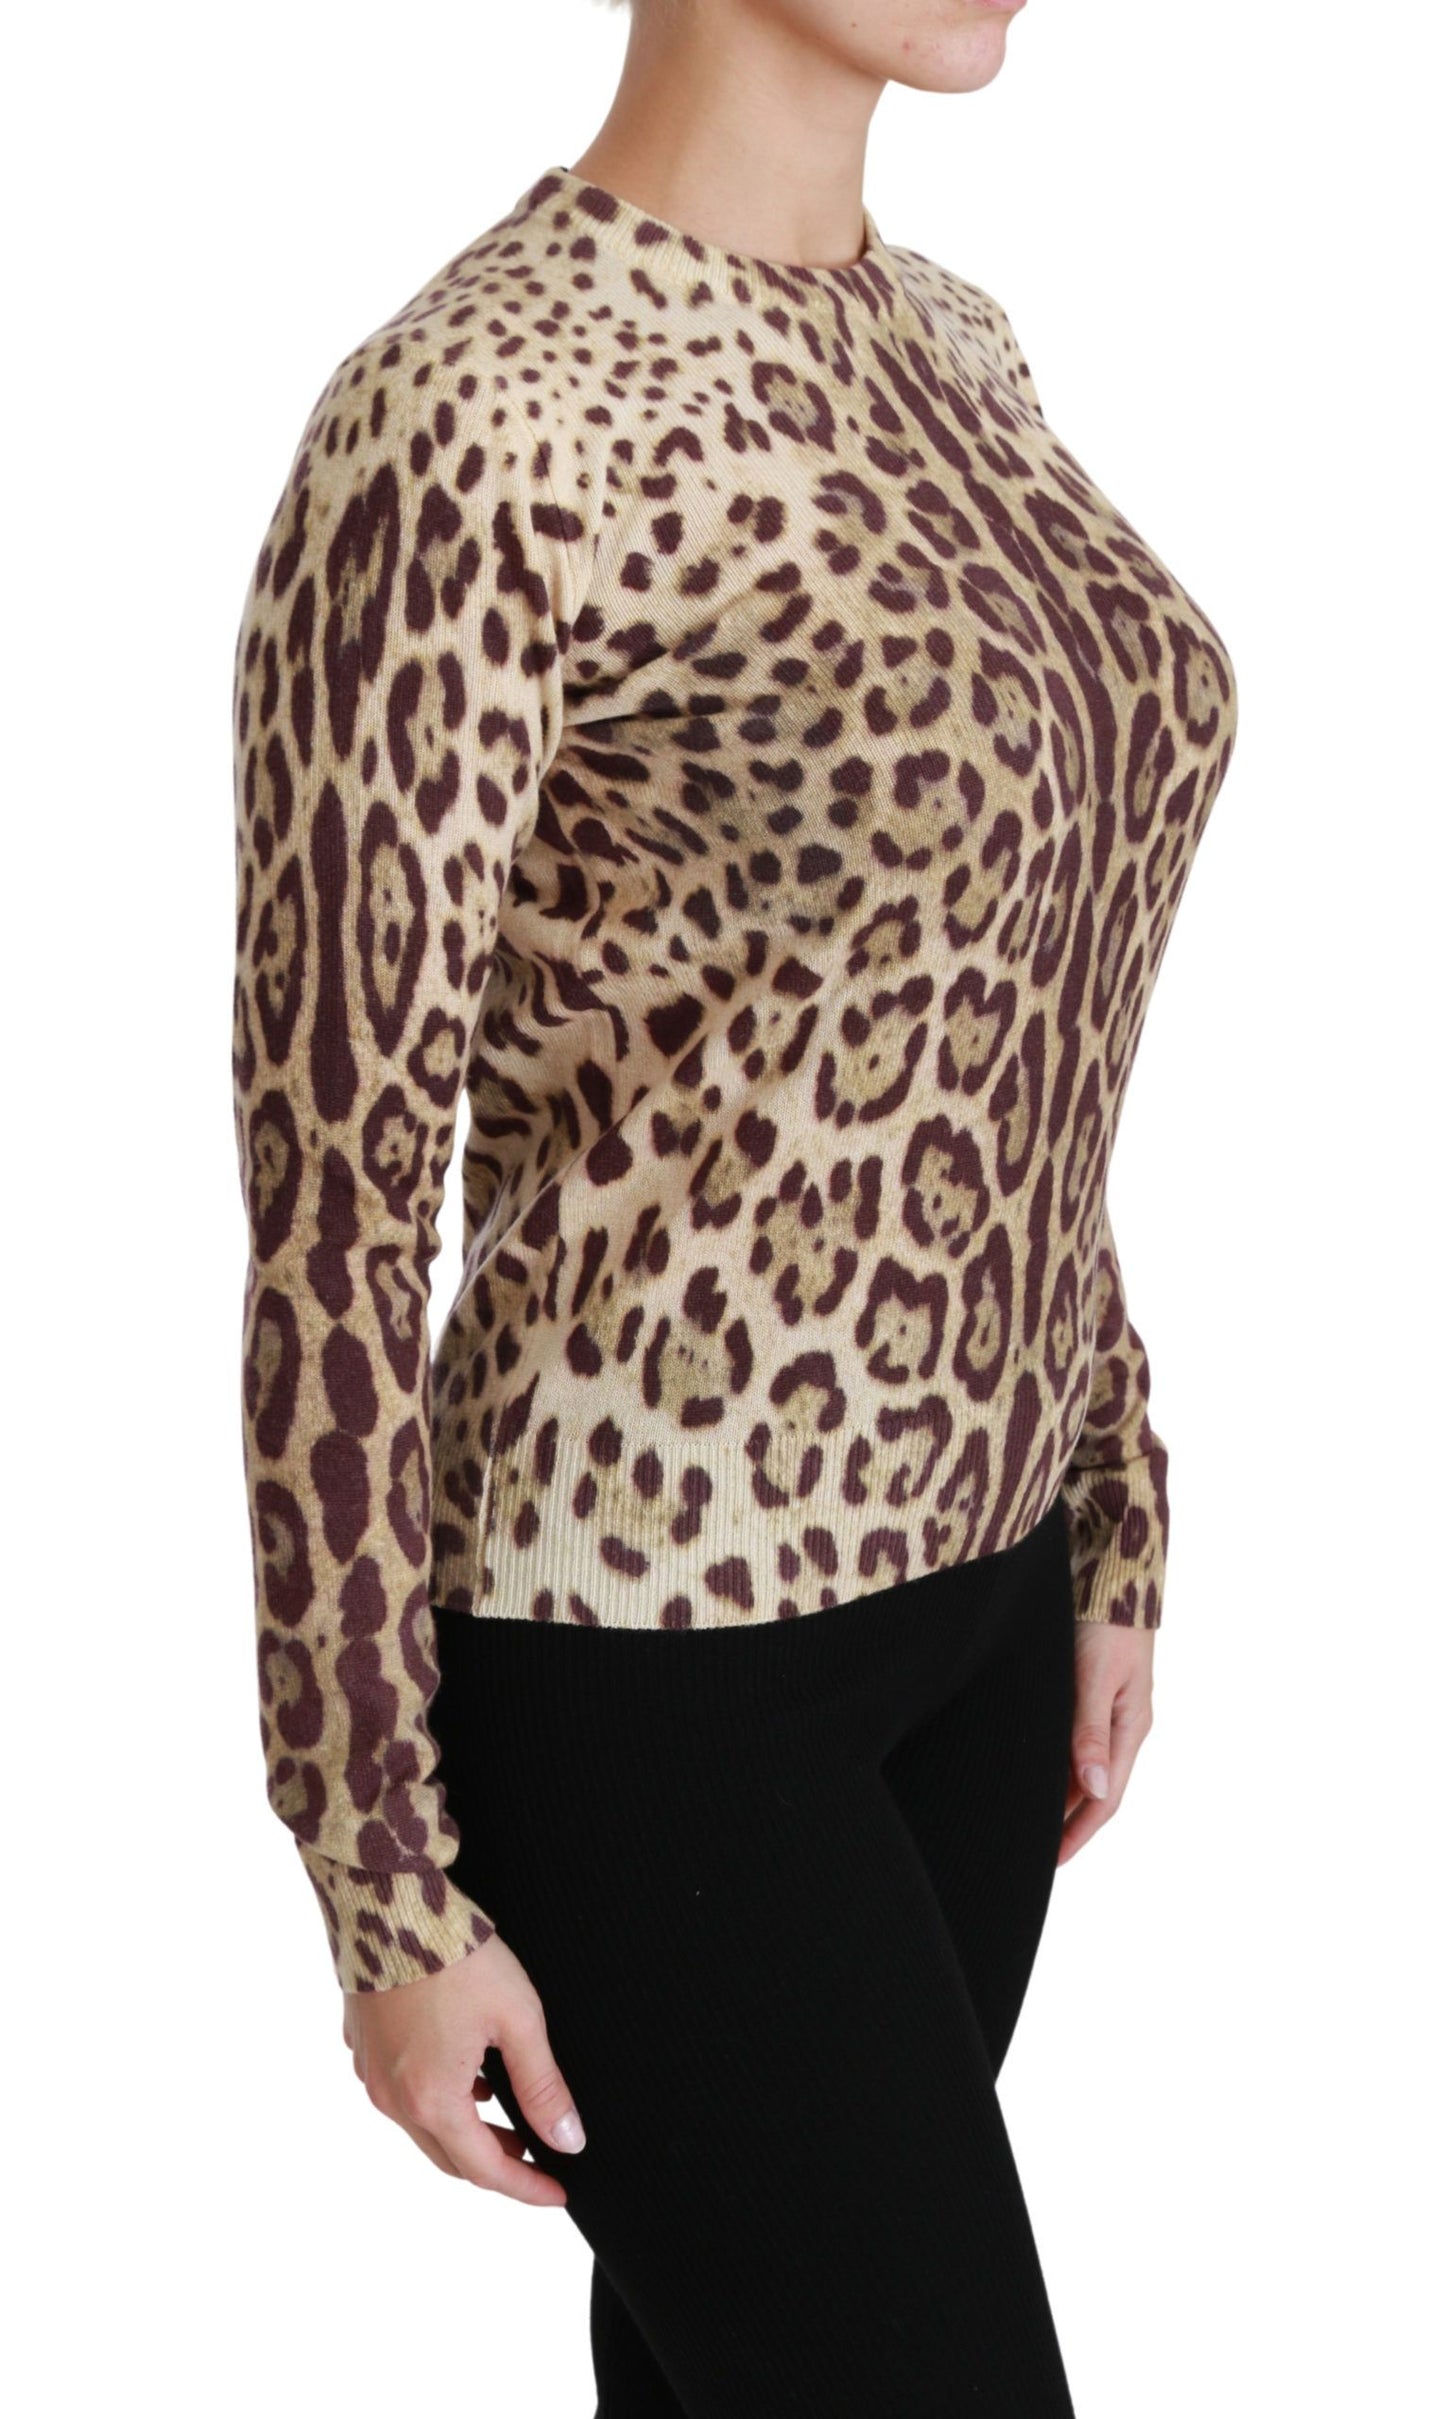 Leopard Cashmere Long Sleeve Blouse Sweater